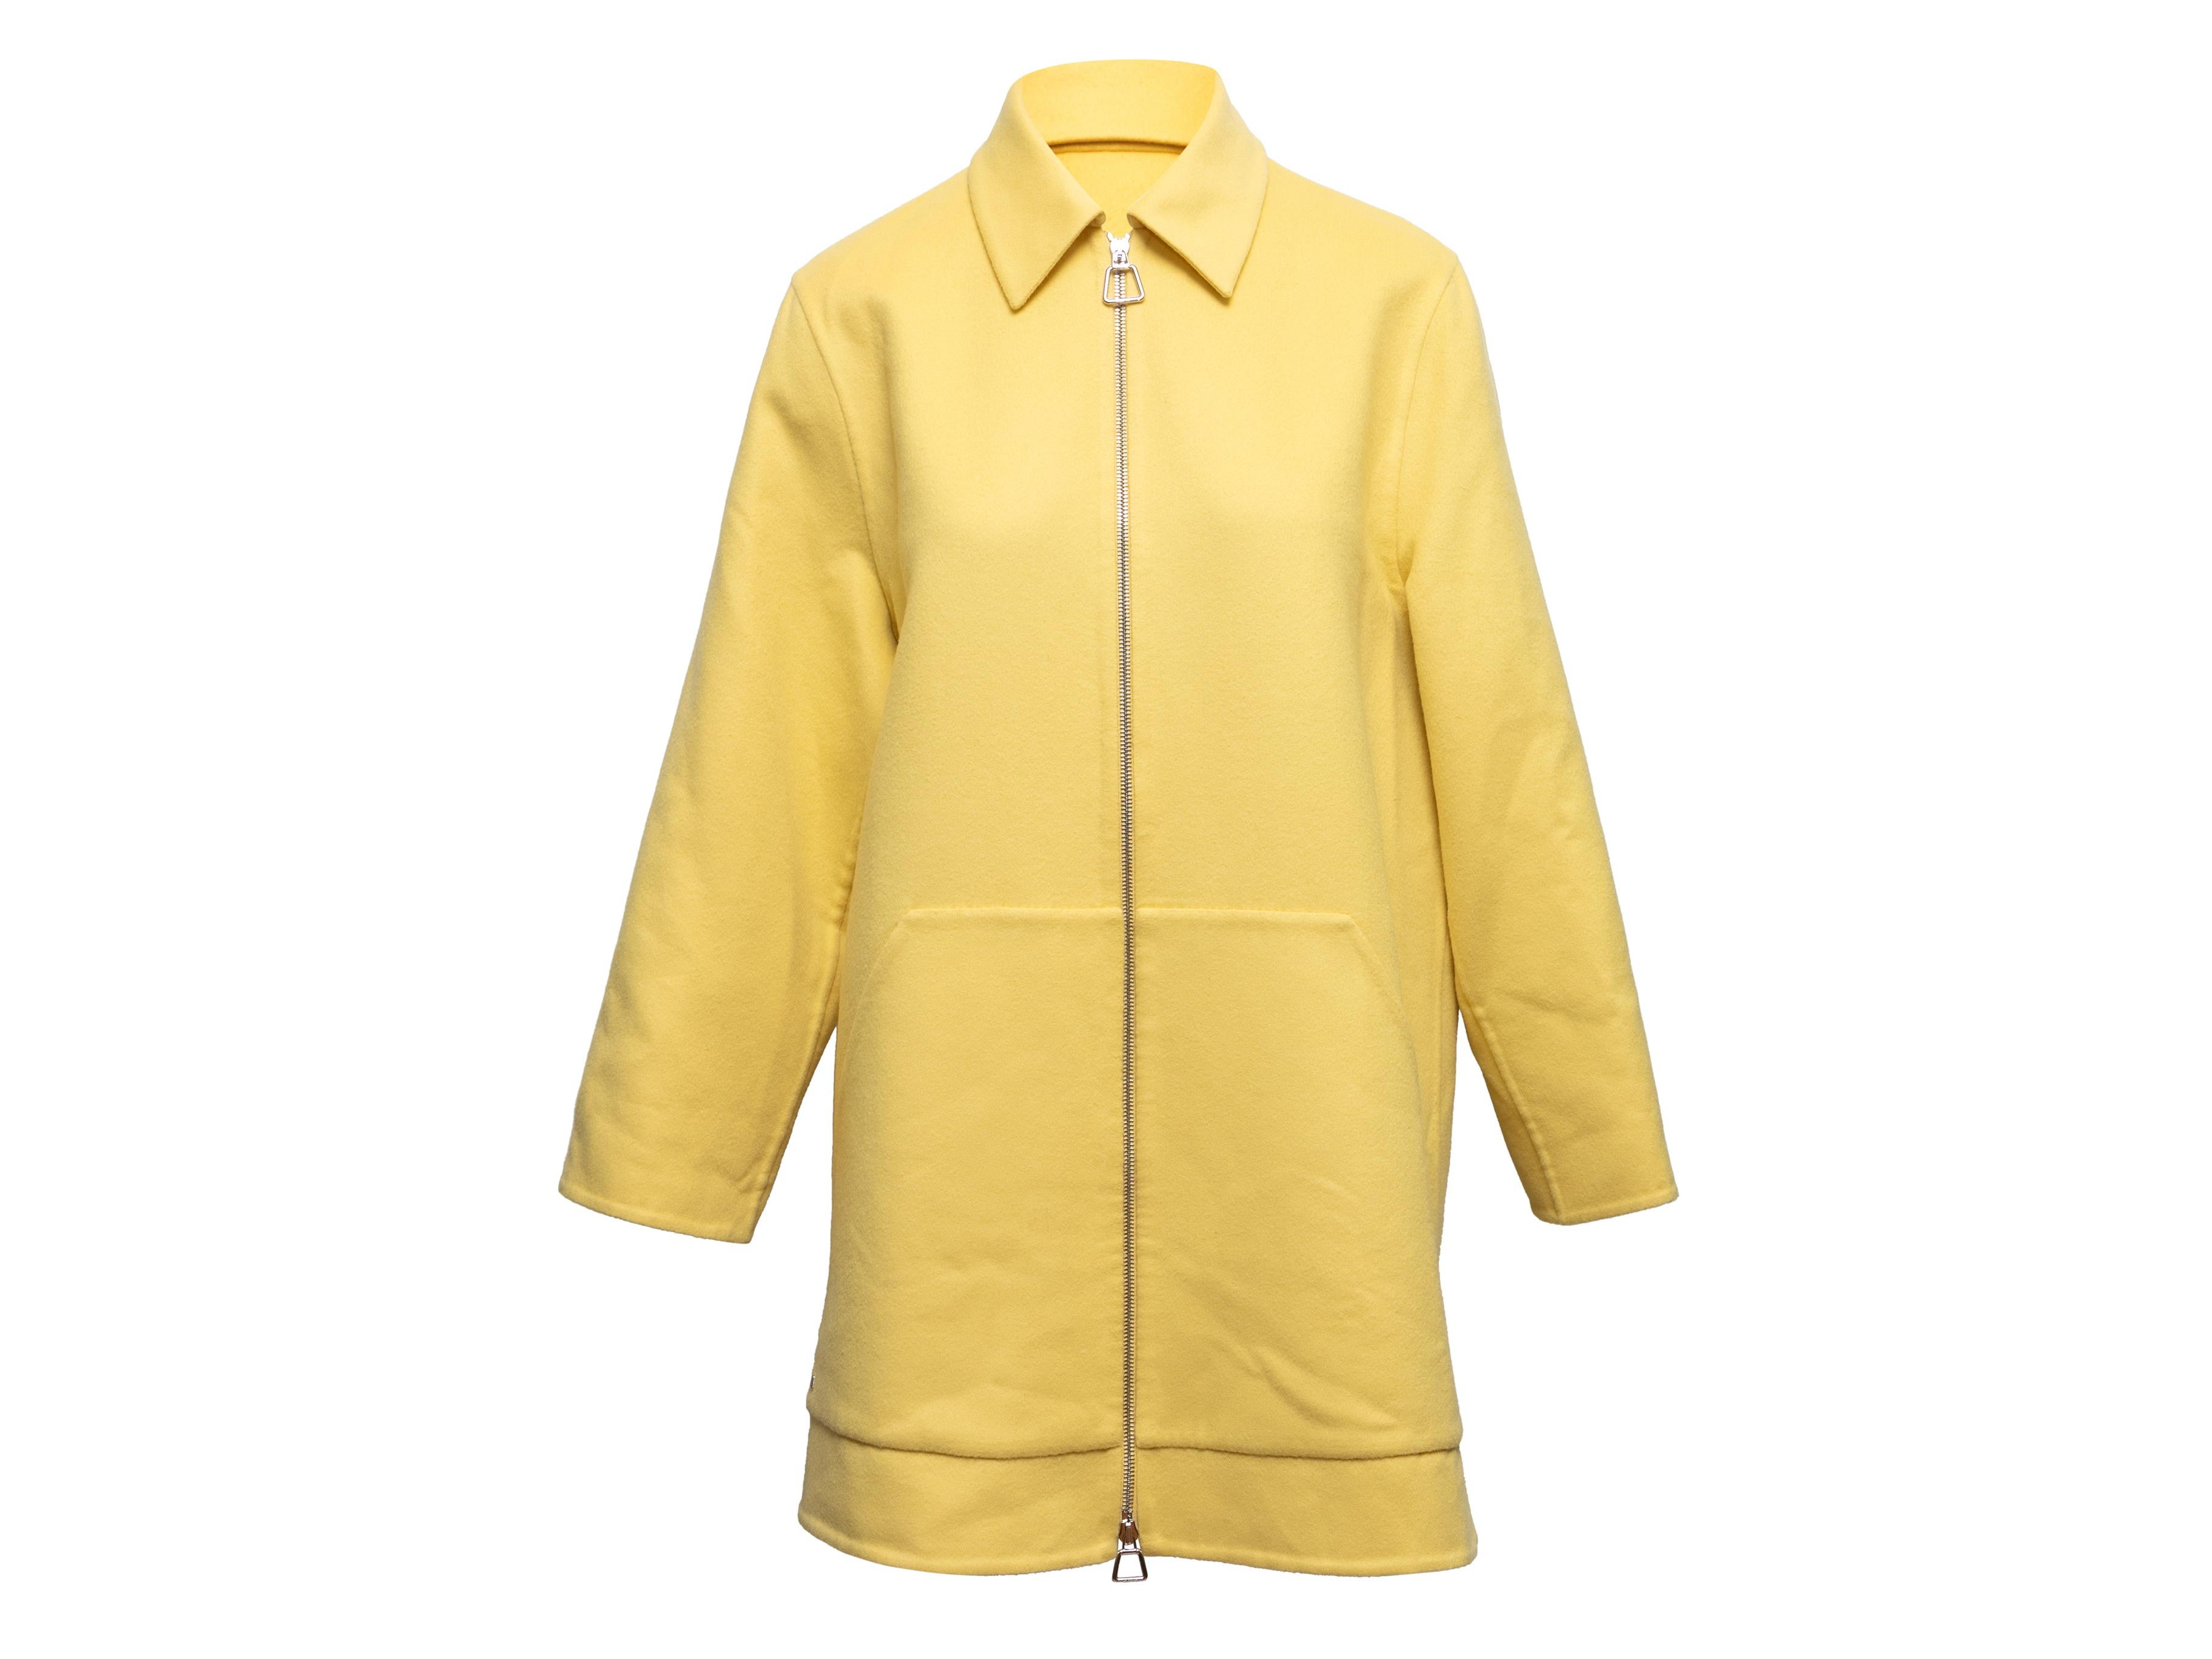  Yellow virgin wool Mimoa coat by Akris. Pointed collar. Dual hip pockets. Zip closure at center front. 41